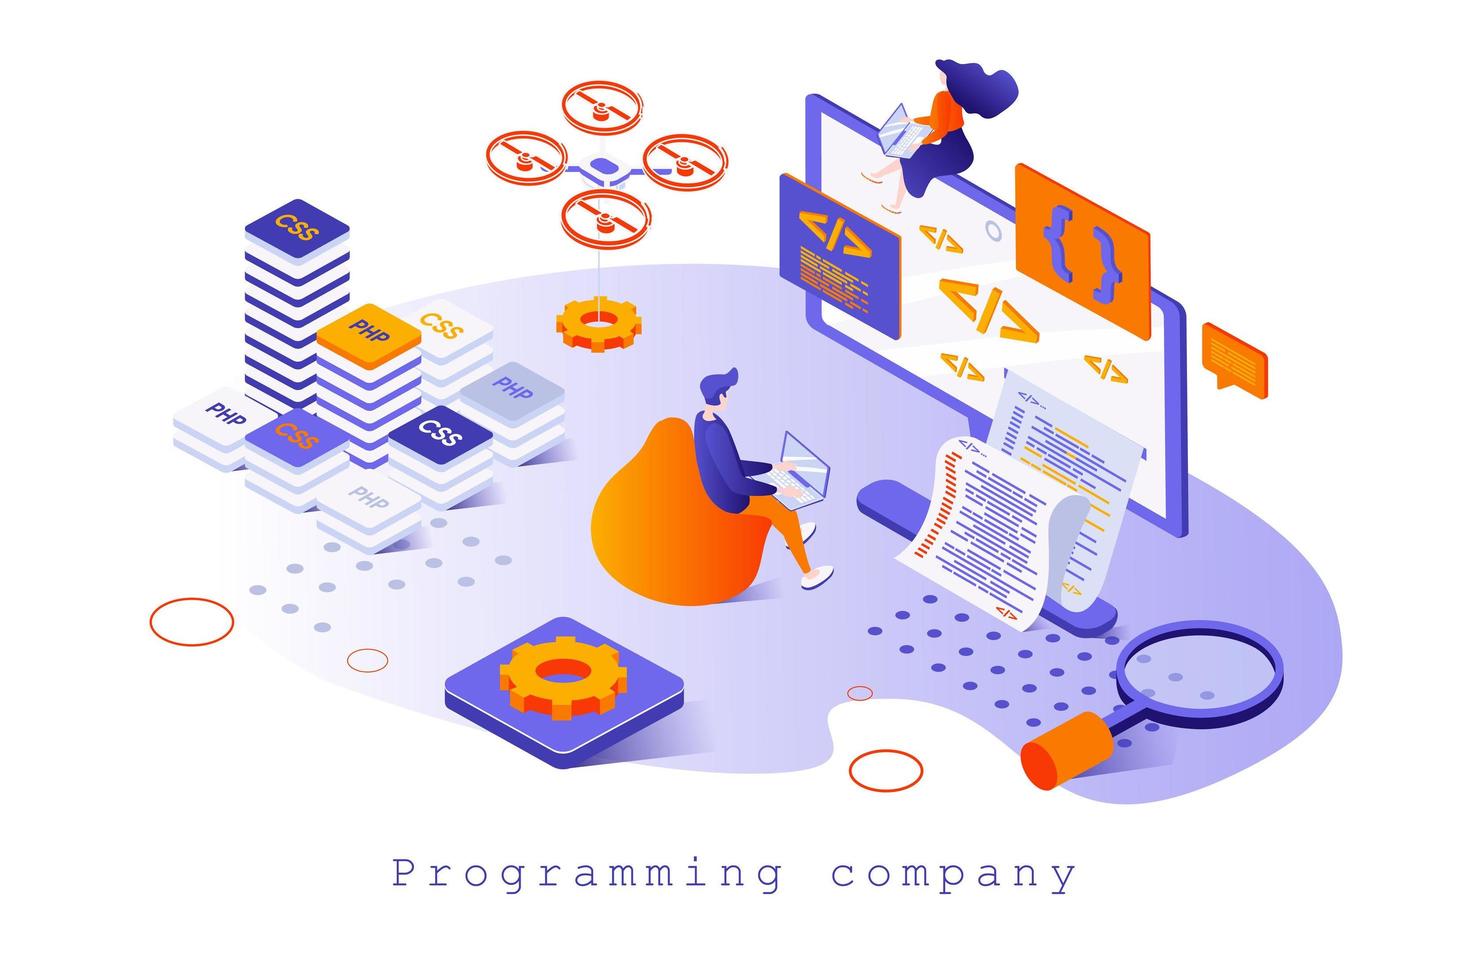 Programming company concept in 3d isometric design. Developer coding and testing, creates and optimizes programs, develops software, web template with people scene. Vector illustration for webpage